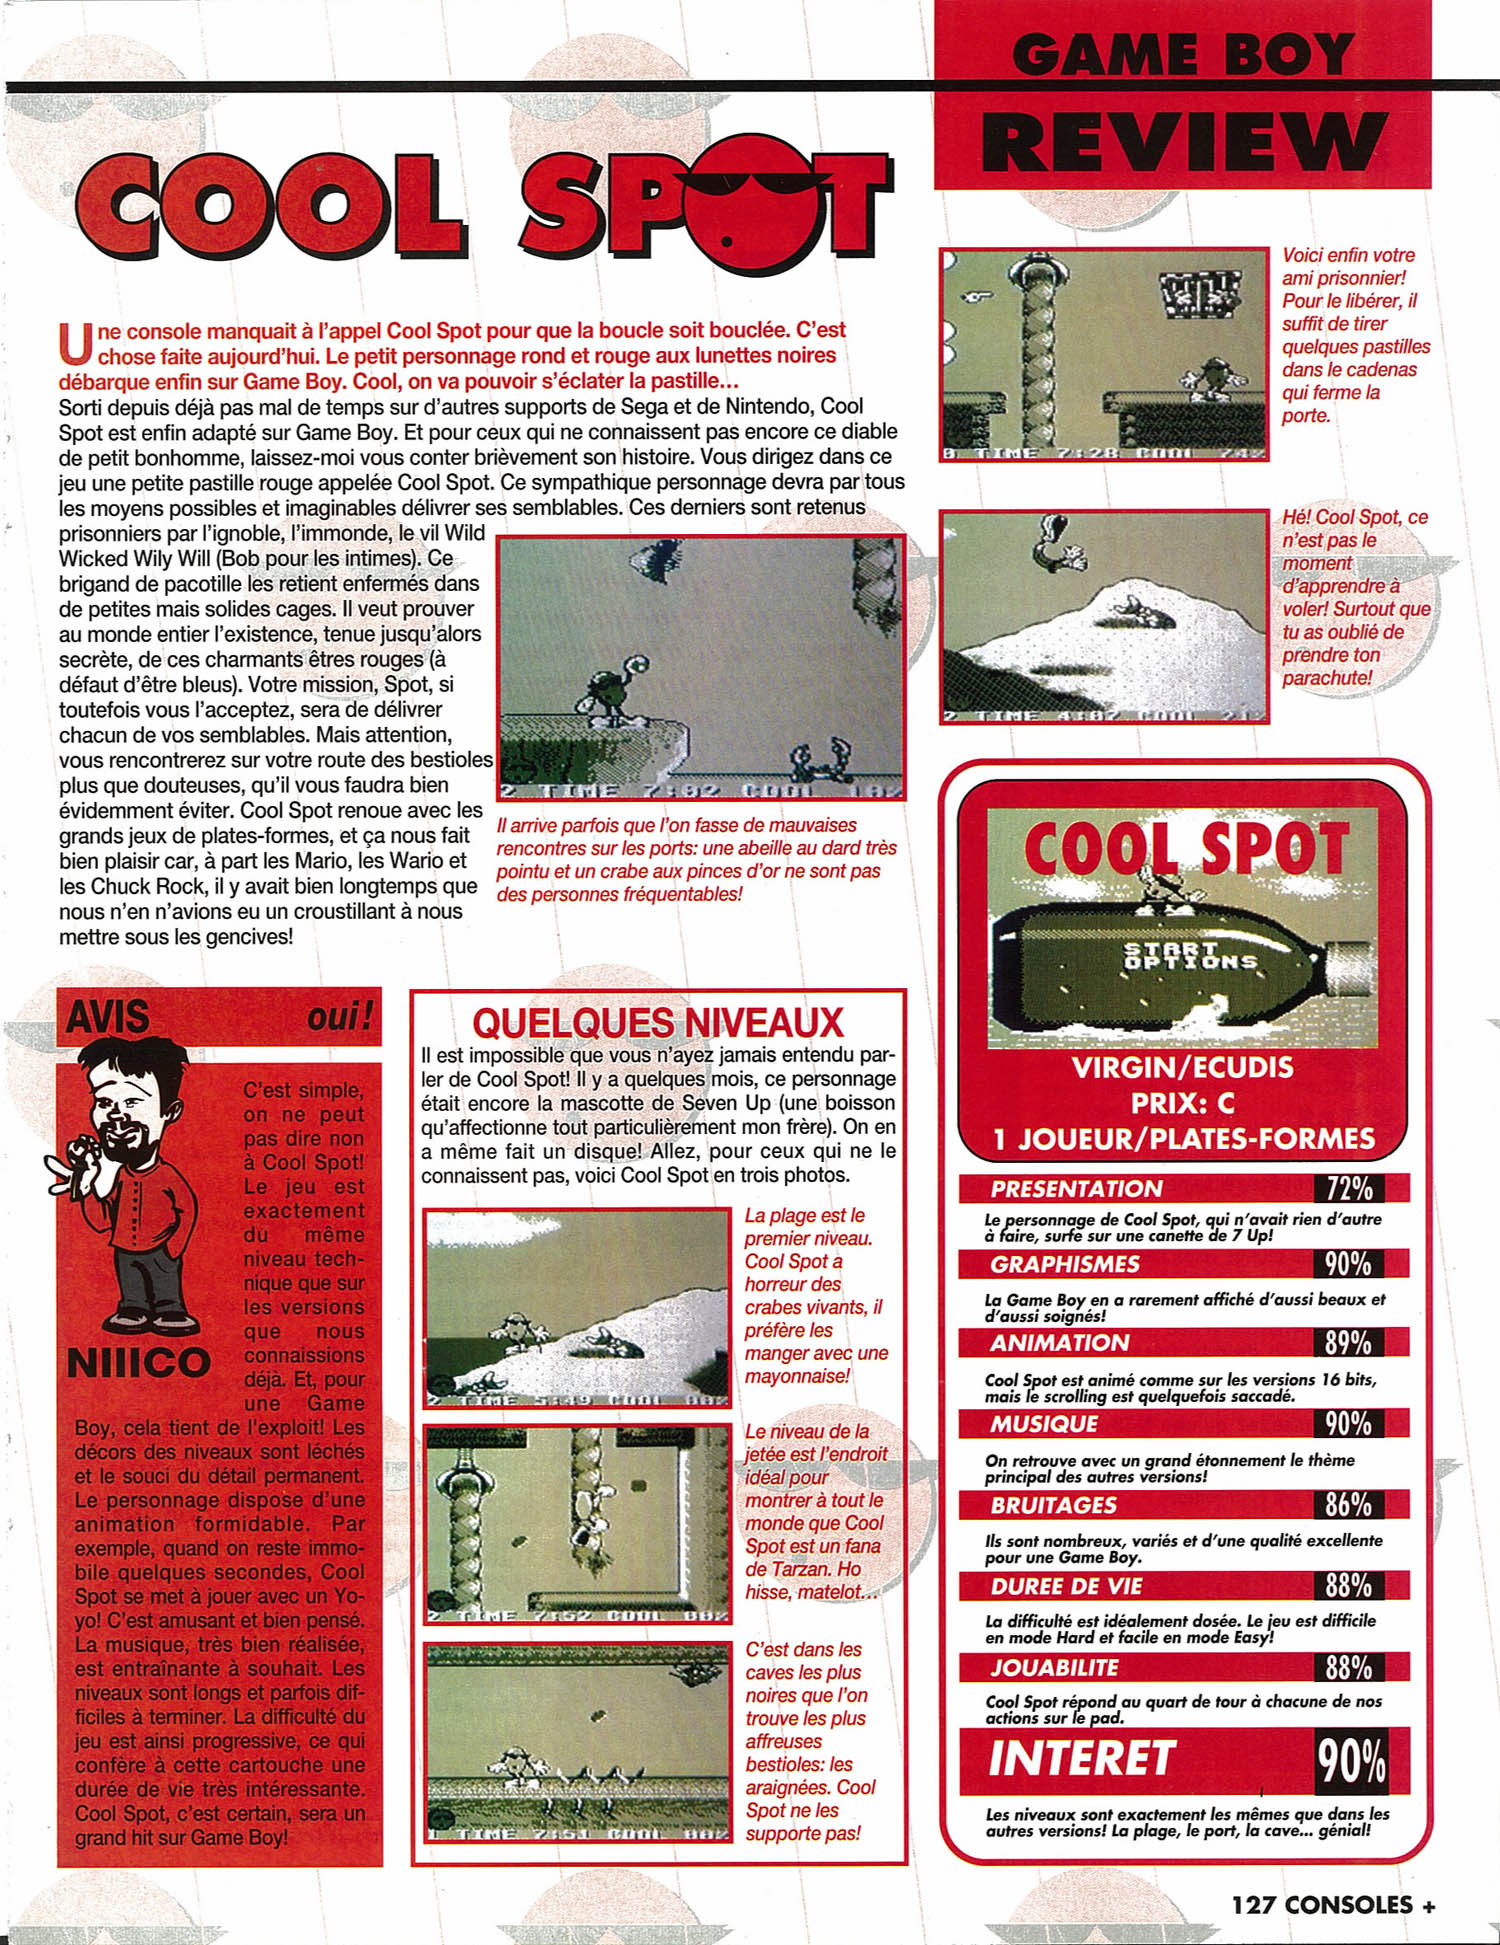 tests//1134/Consoles + 033 - Page 127 (juin 1994).jpg